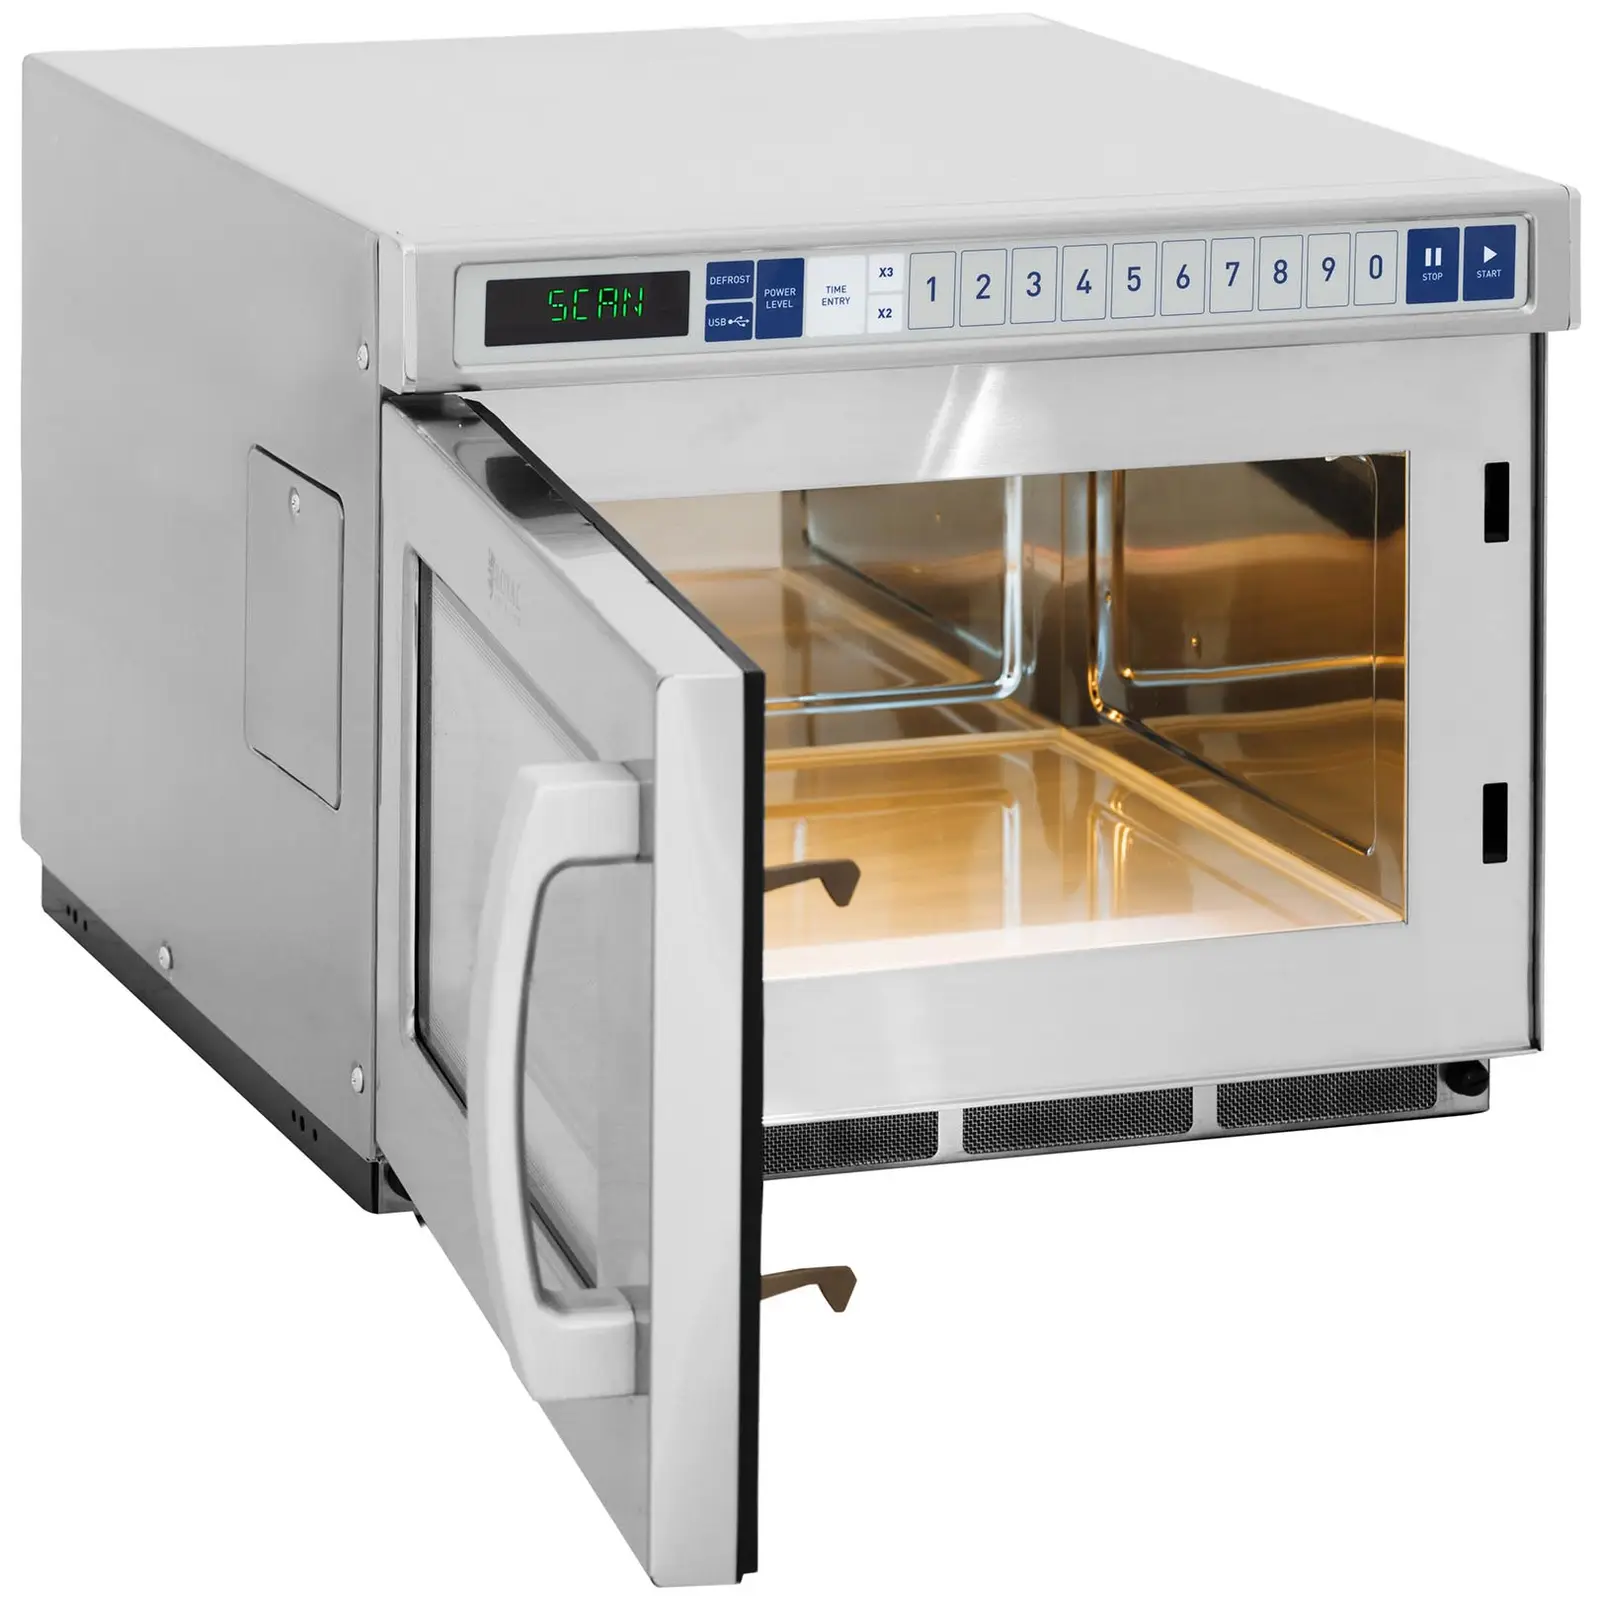 Mikroovn - 3000 W - 17 l - Royal Catering